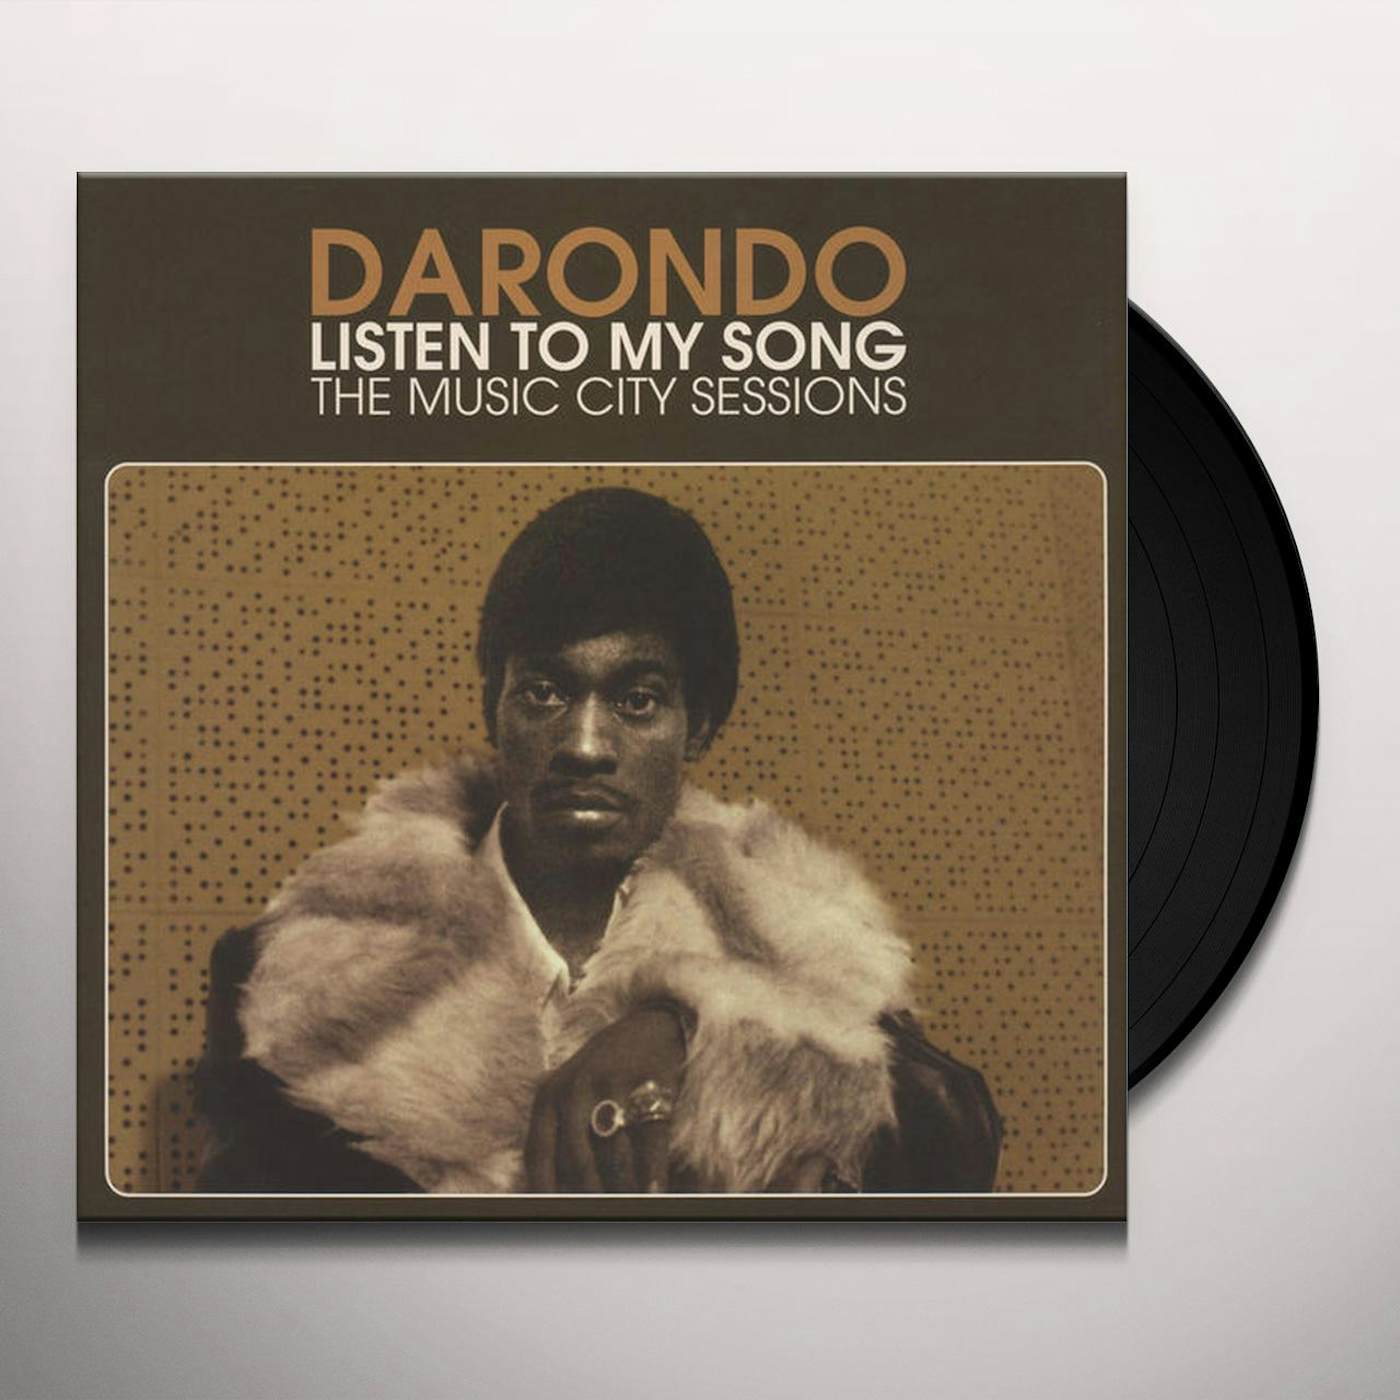 Darondo LISTEN TO MY SONG: MUSIC CITY SESSIONS Vinyl Record